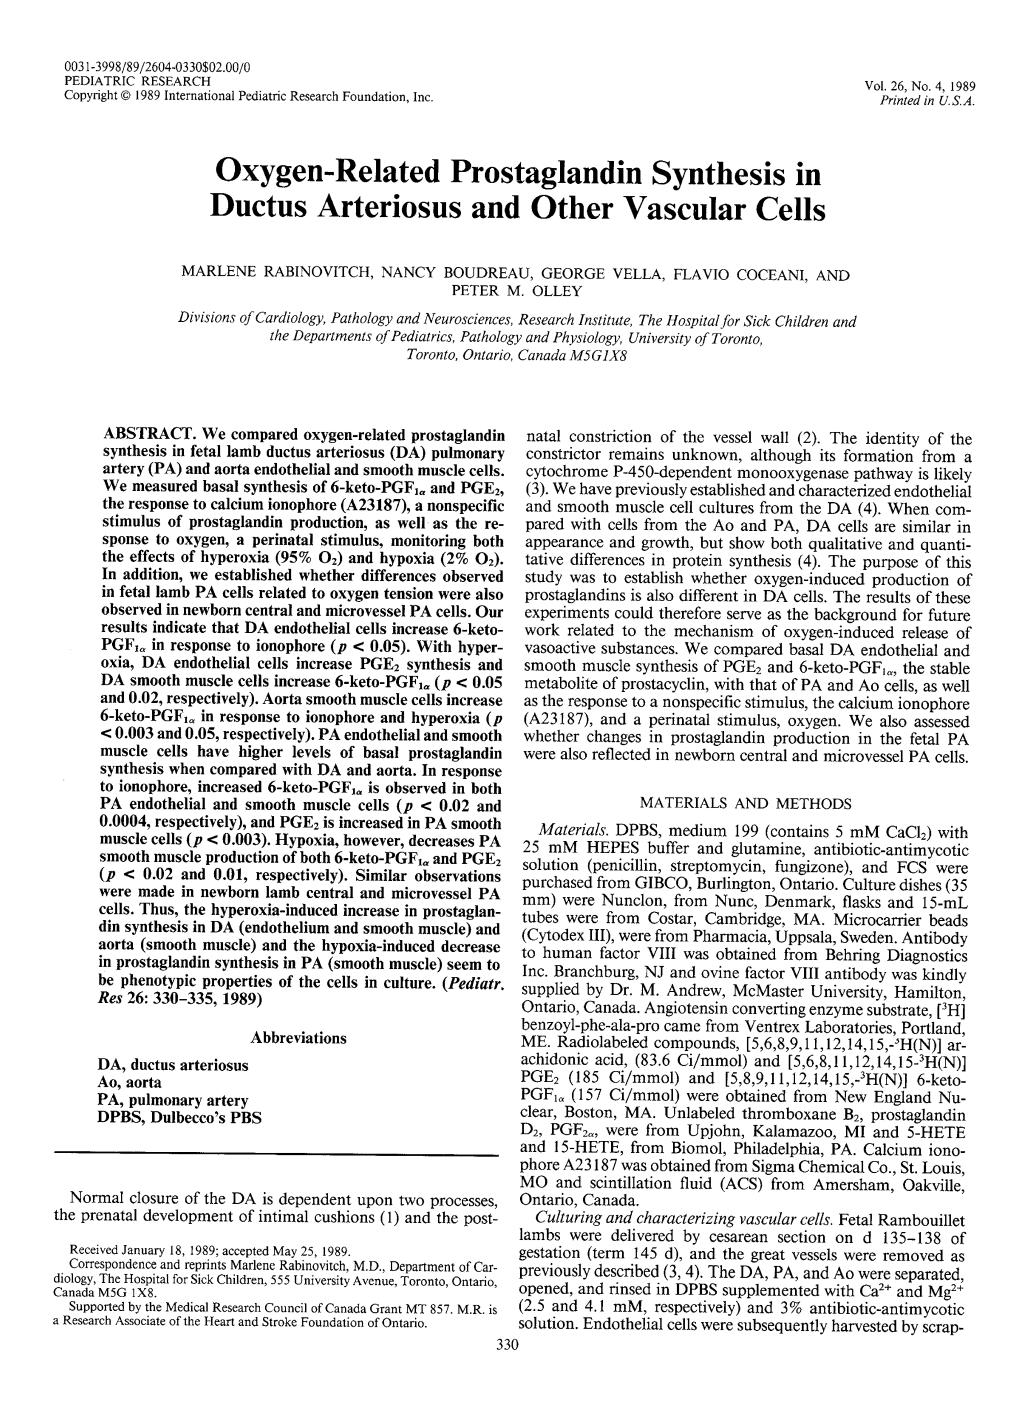 Oxygen-Related Prostaglandin Synthesis in Ductus Arteriosus and Other Vascular Cells